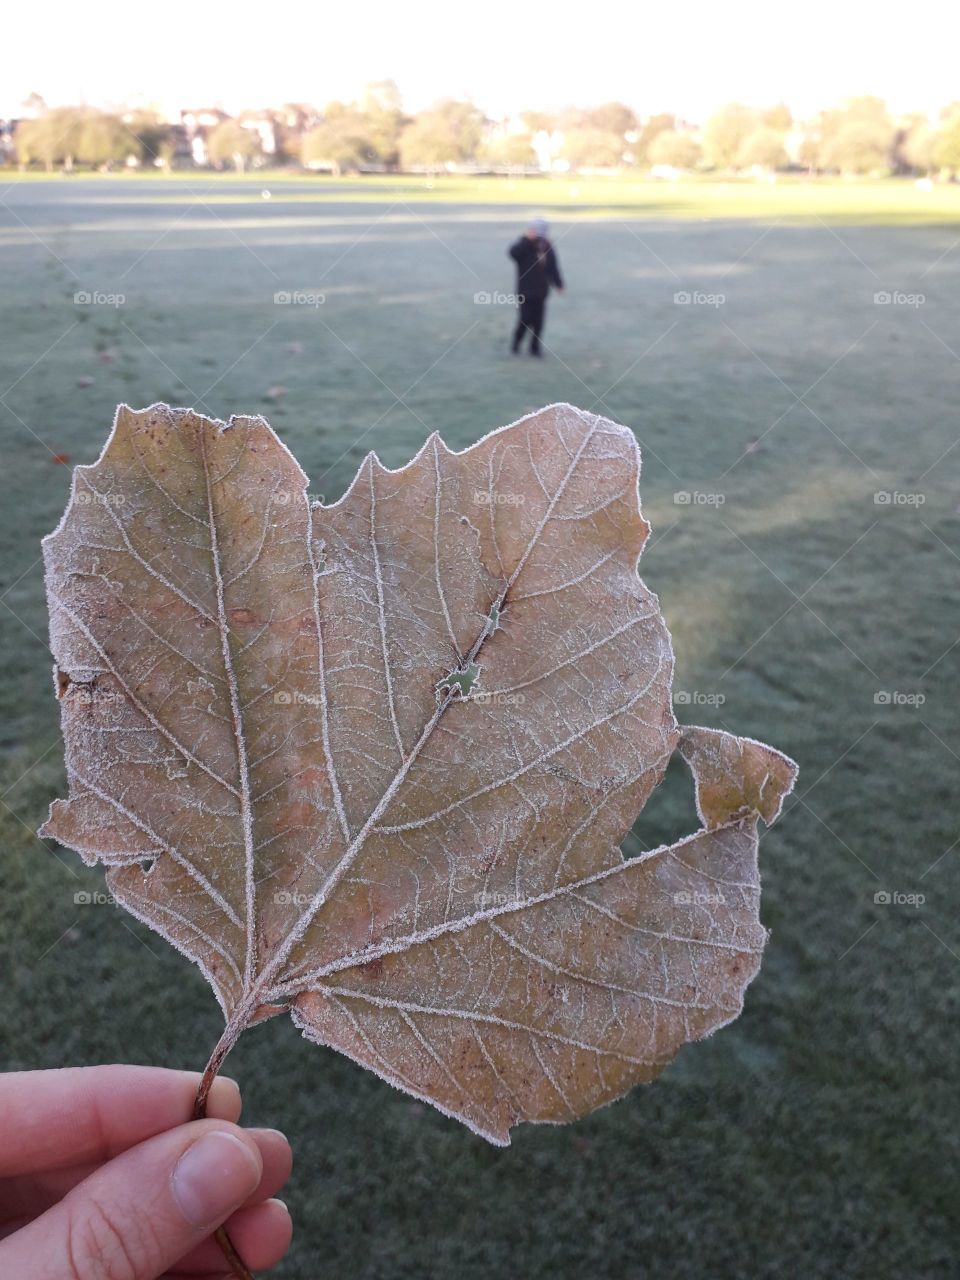 frozen autumn leaf in the front plan and a figure of a little boy at the back in a freezing temperatures